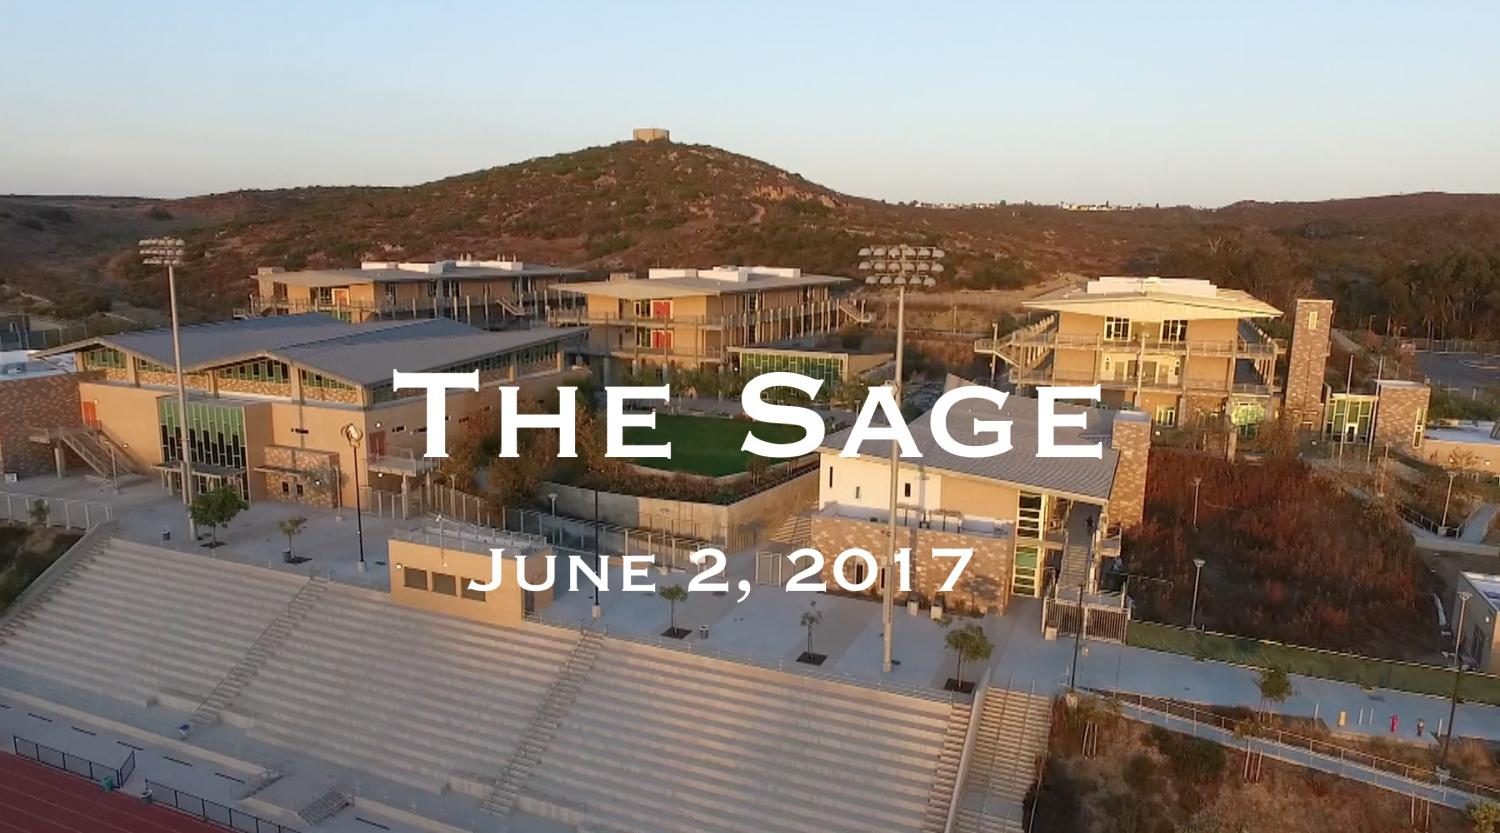 The Sage: June 2, 2017